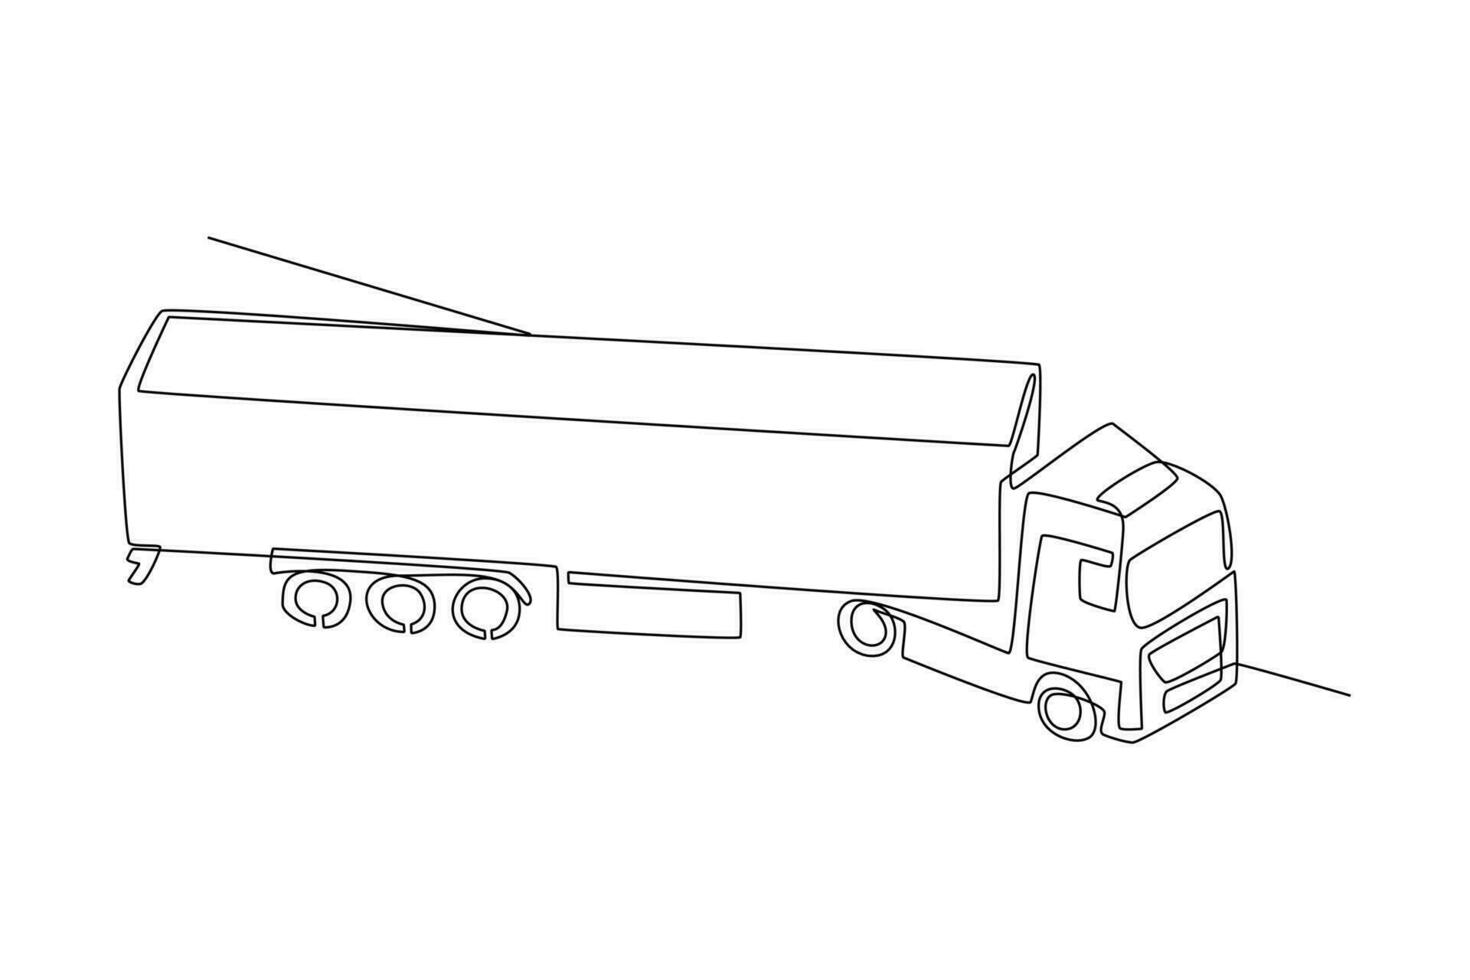 Continuous one line drawing distribution and logistic concept. Single line draw design vector graphic illustration.